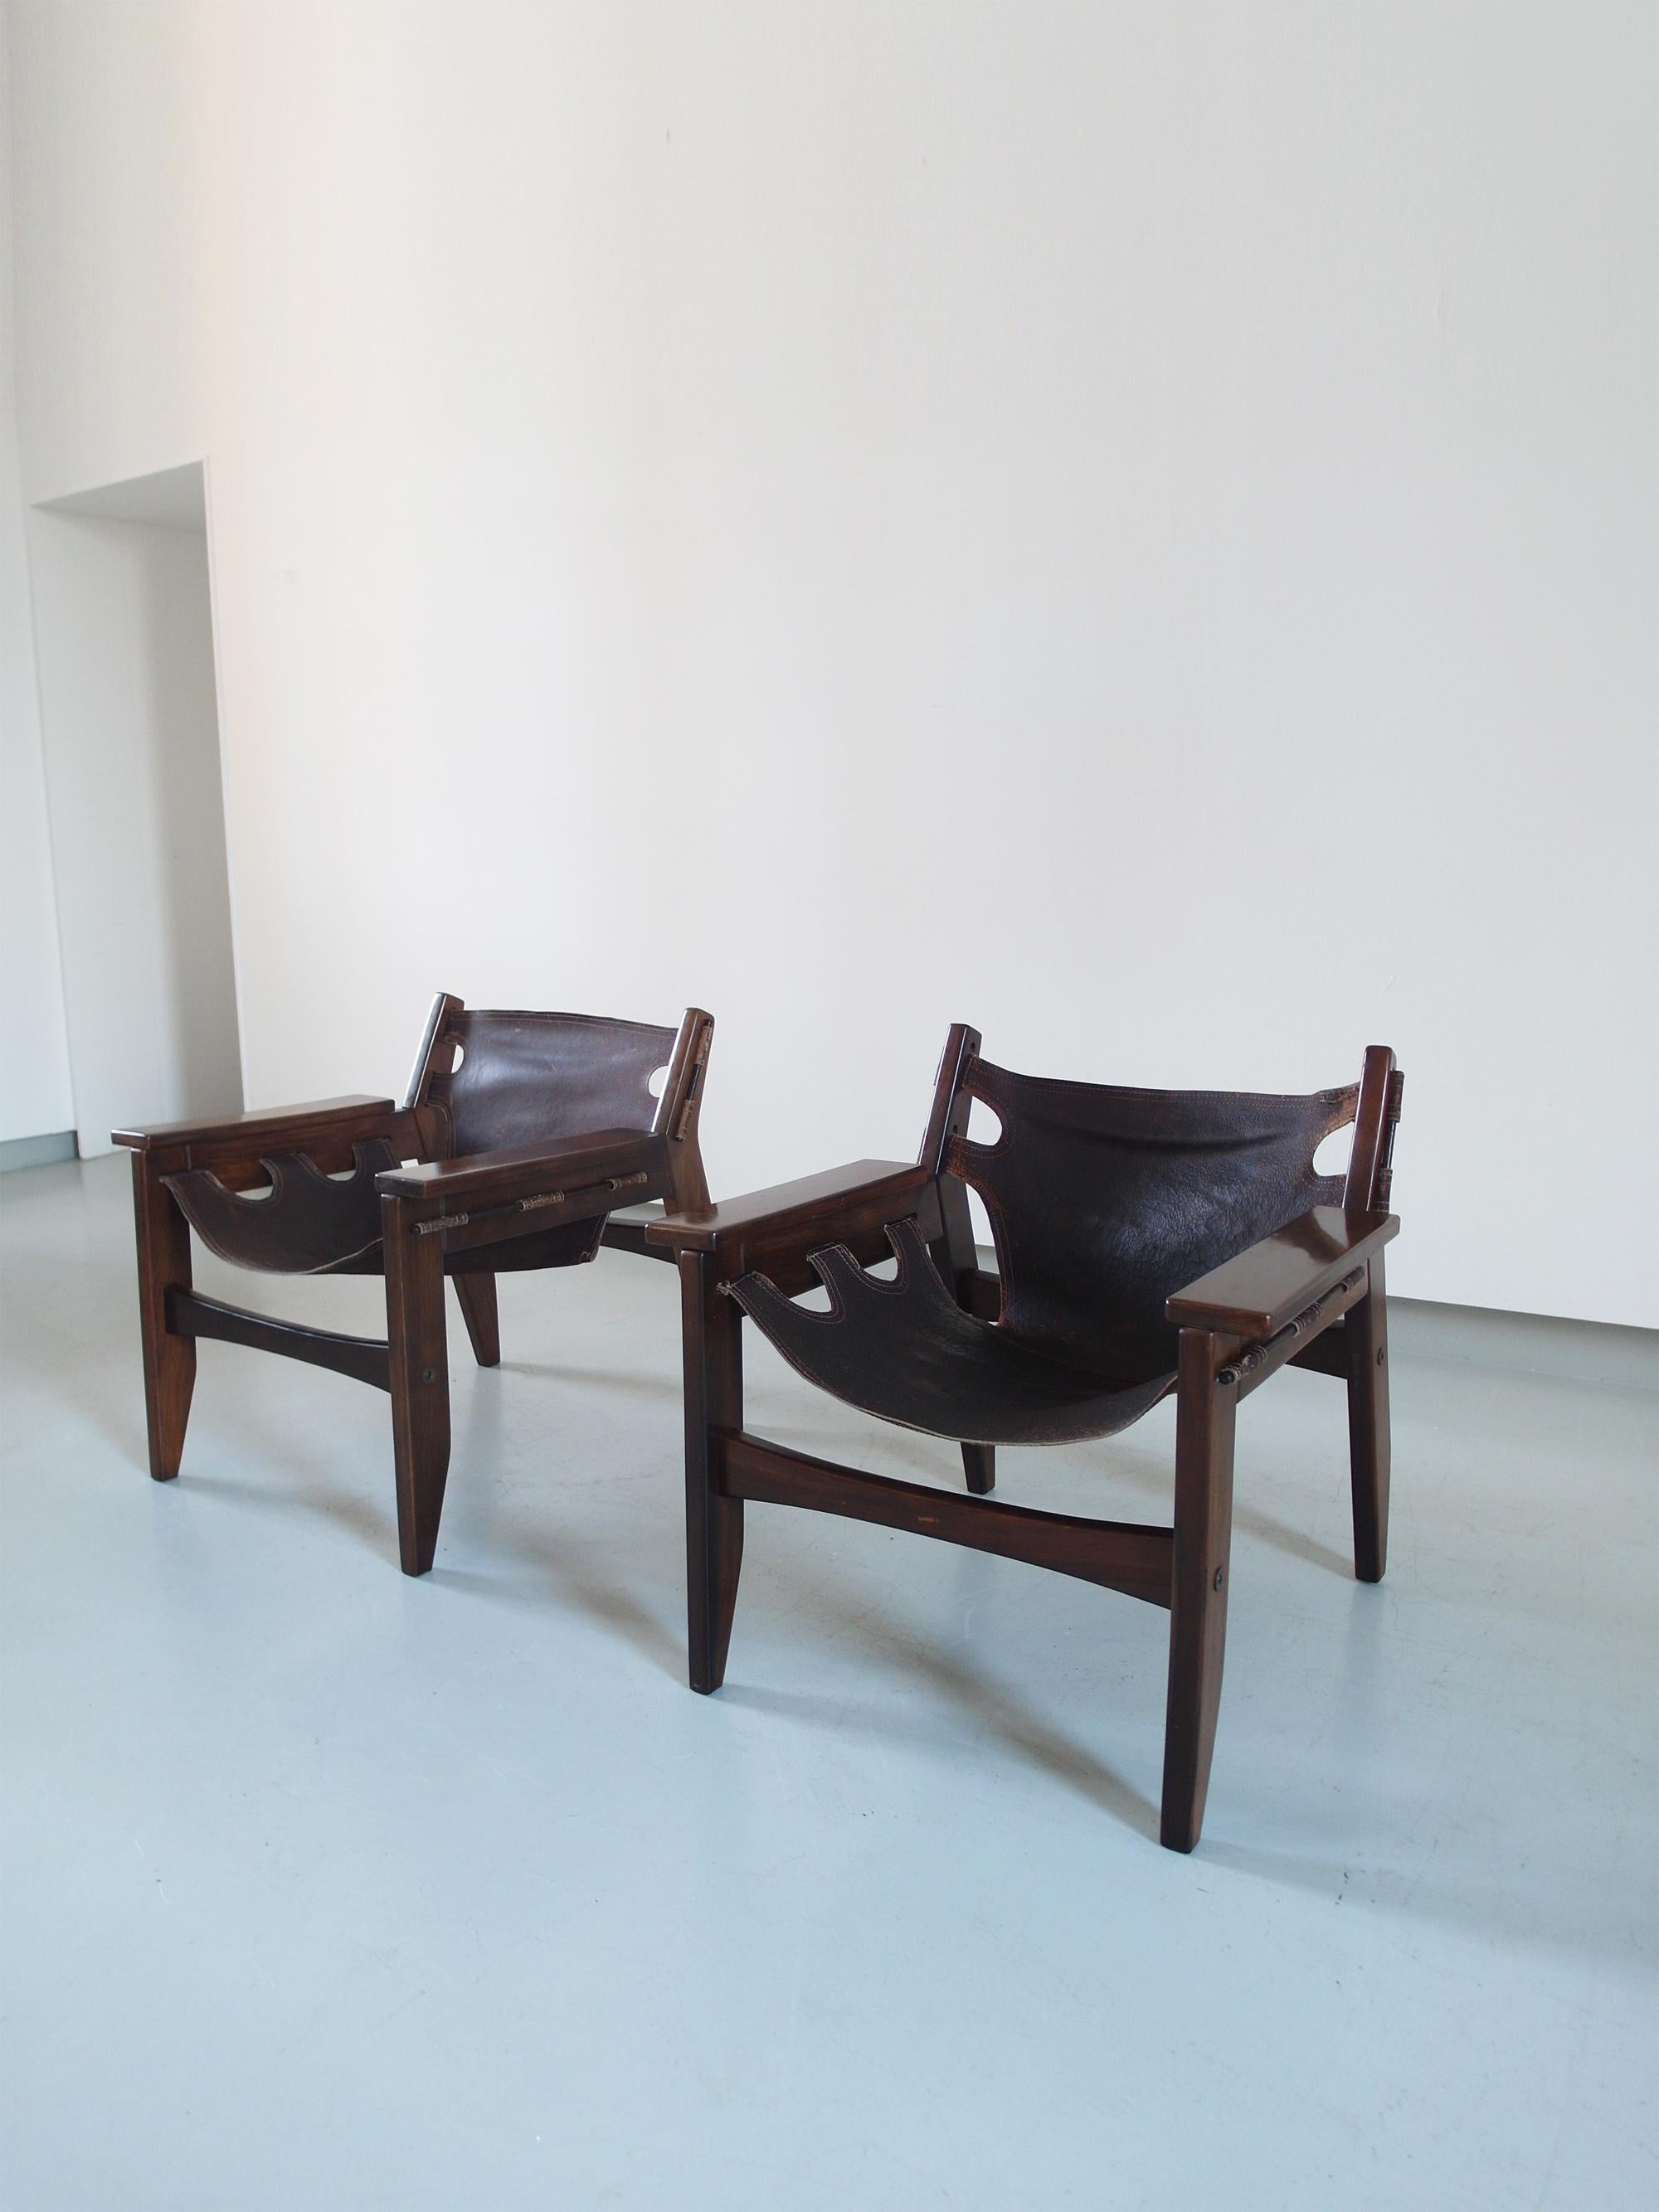 Pair of Sergio Rodrigues Kilin Lounge Chairs for Oca, Brazil, 1973 In Good Condition For Sale In Woudrichem, NL